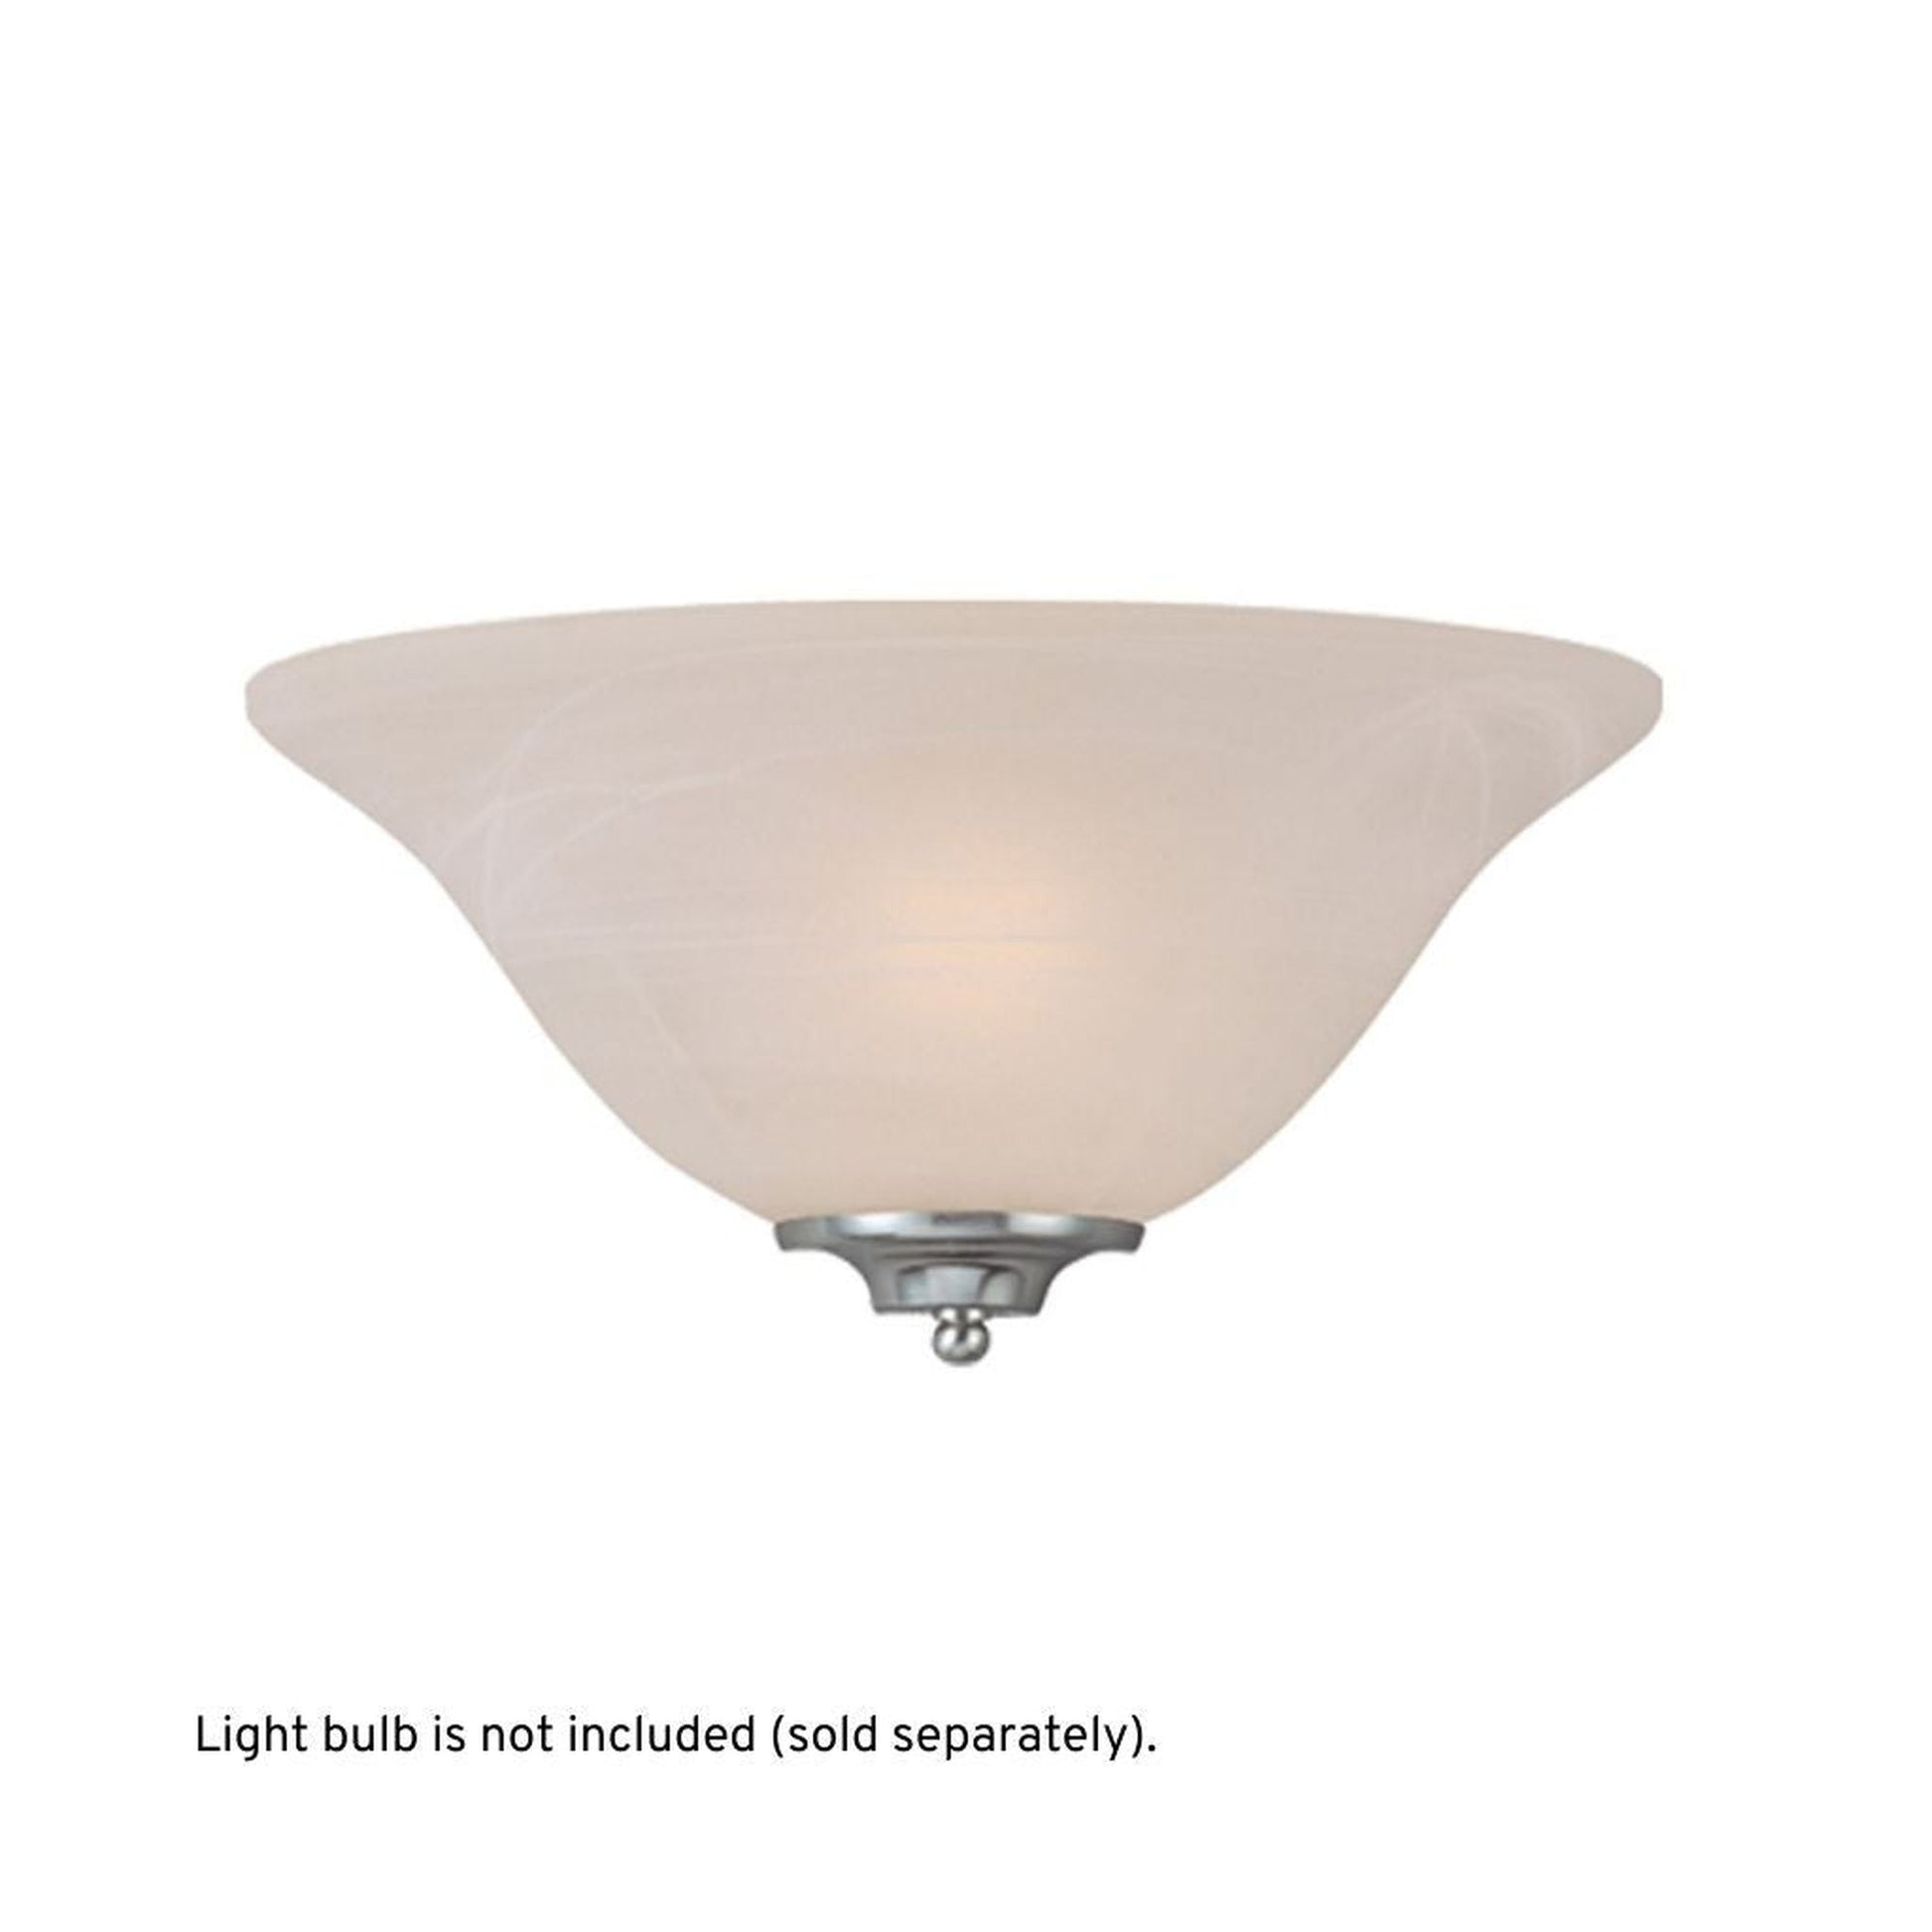 Craftmade Raleigh 7" x 13" 1-Light Satin Nickel Wall Sconce With Bowl Faux Alabaster Glass Shade